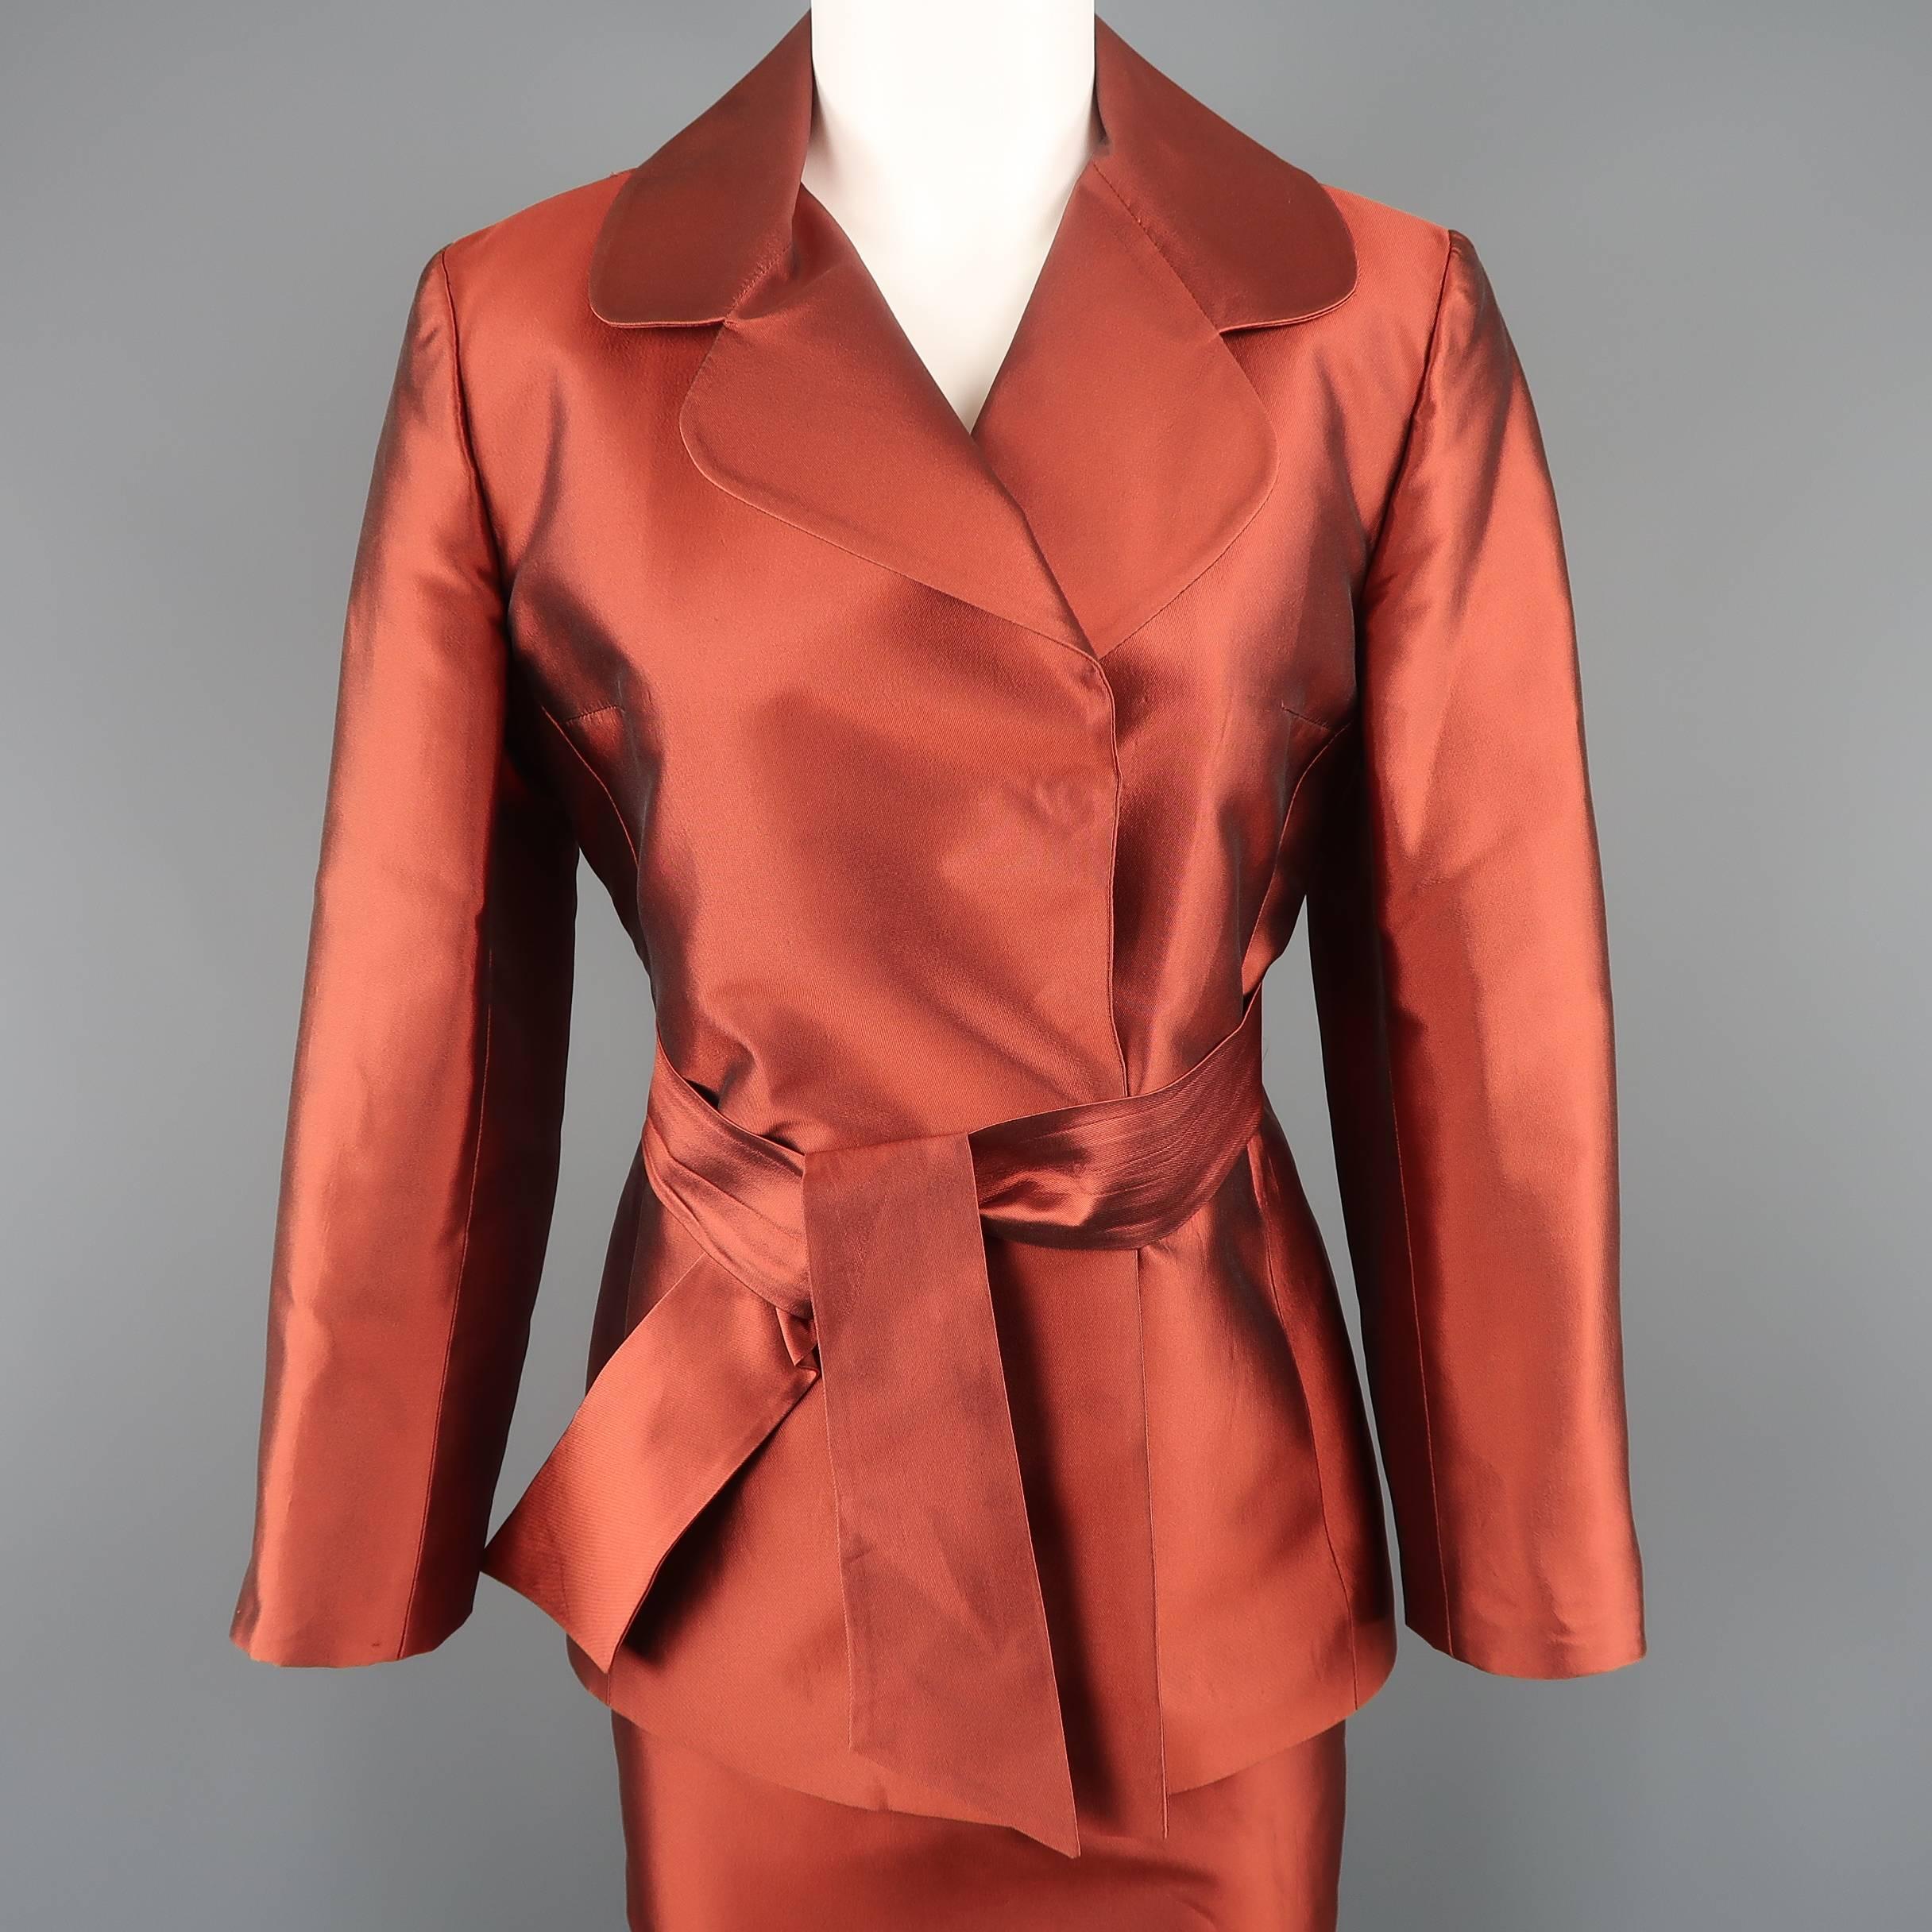 Archive DOLE & GABBANA suit comes in a gorgeous iridescent copper red silk taffeta and includes a hidden snap closure, double breasted jacket with round lapel and sash belt with a matching high rise skirt. Care tags removed and minor wear